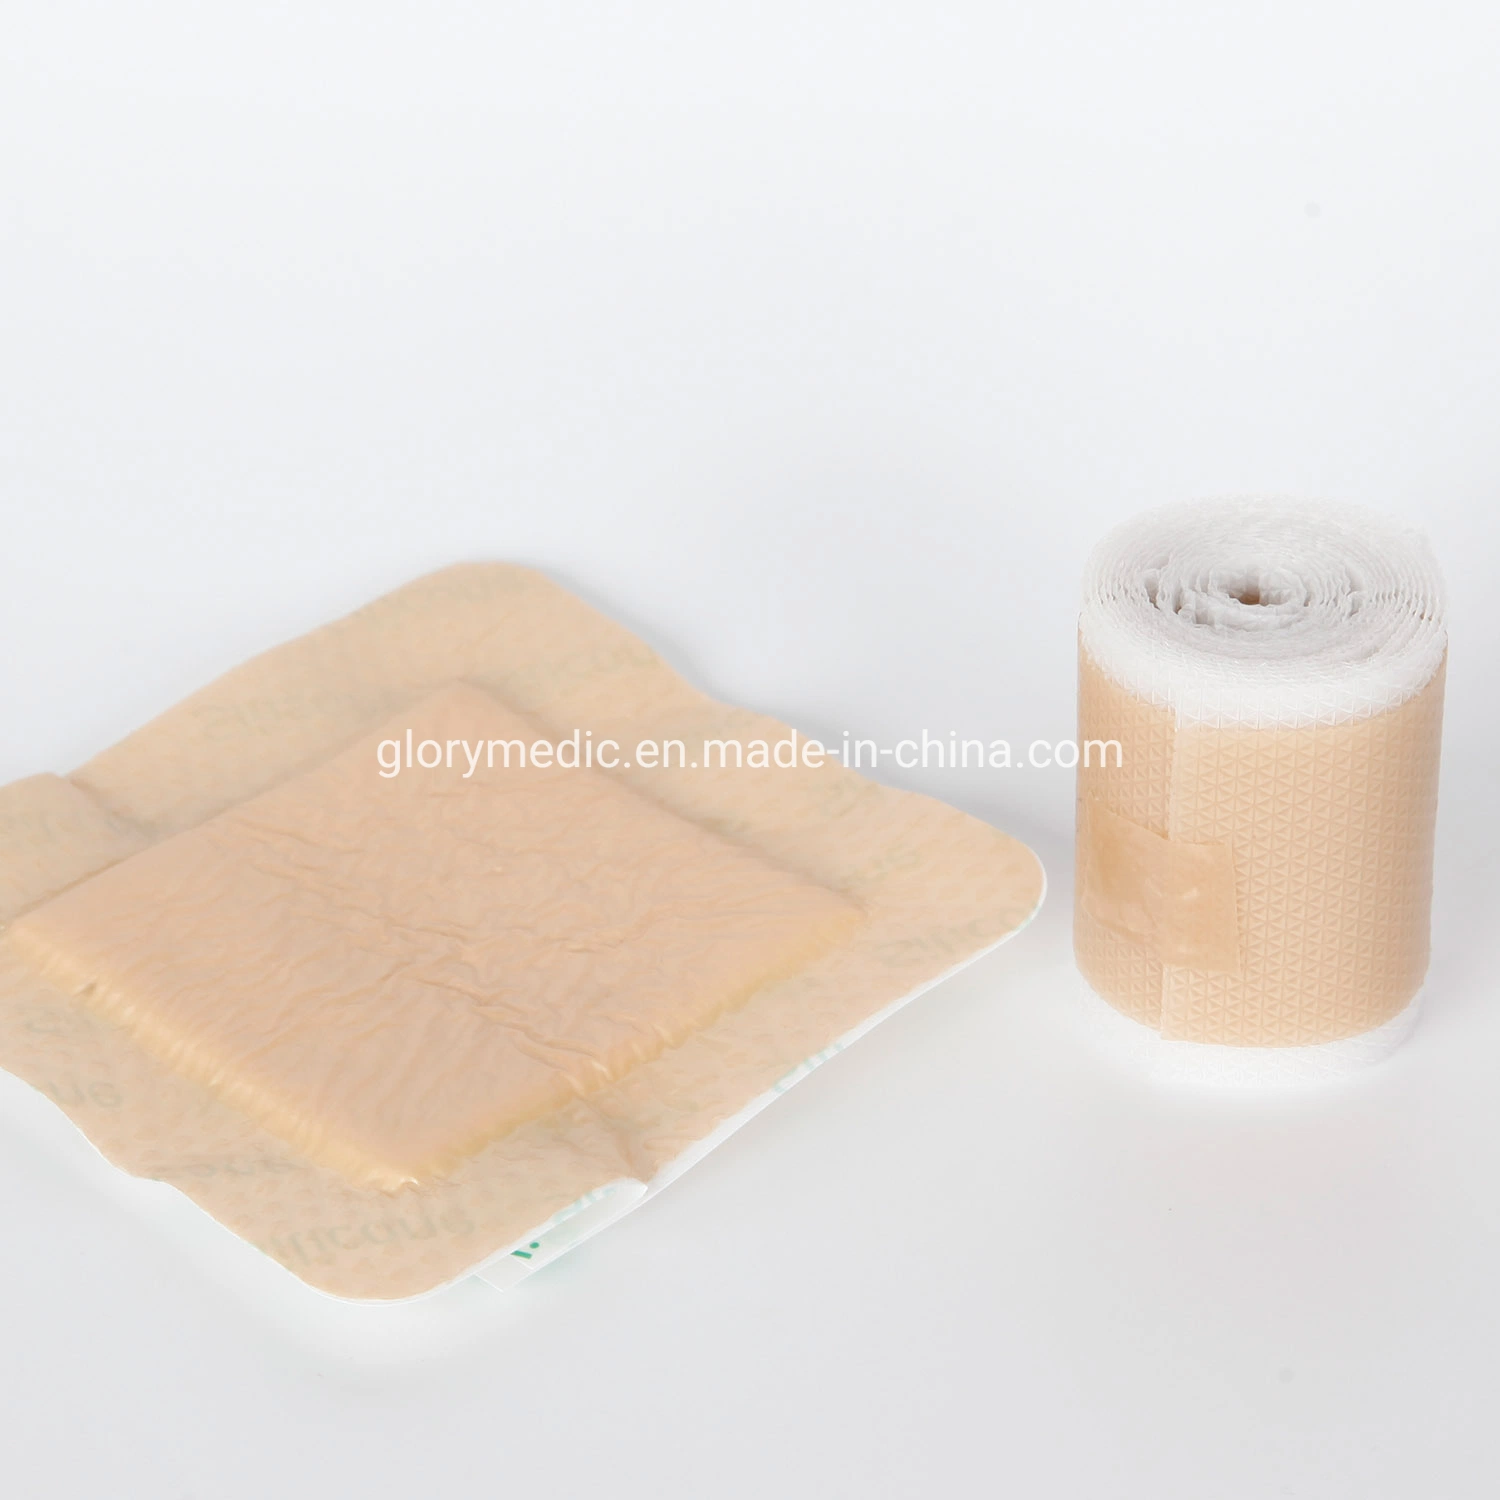 PU Film Backing Wound Care OEM Silicone Foam Dressing with Border